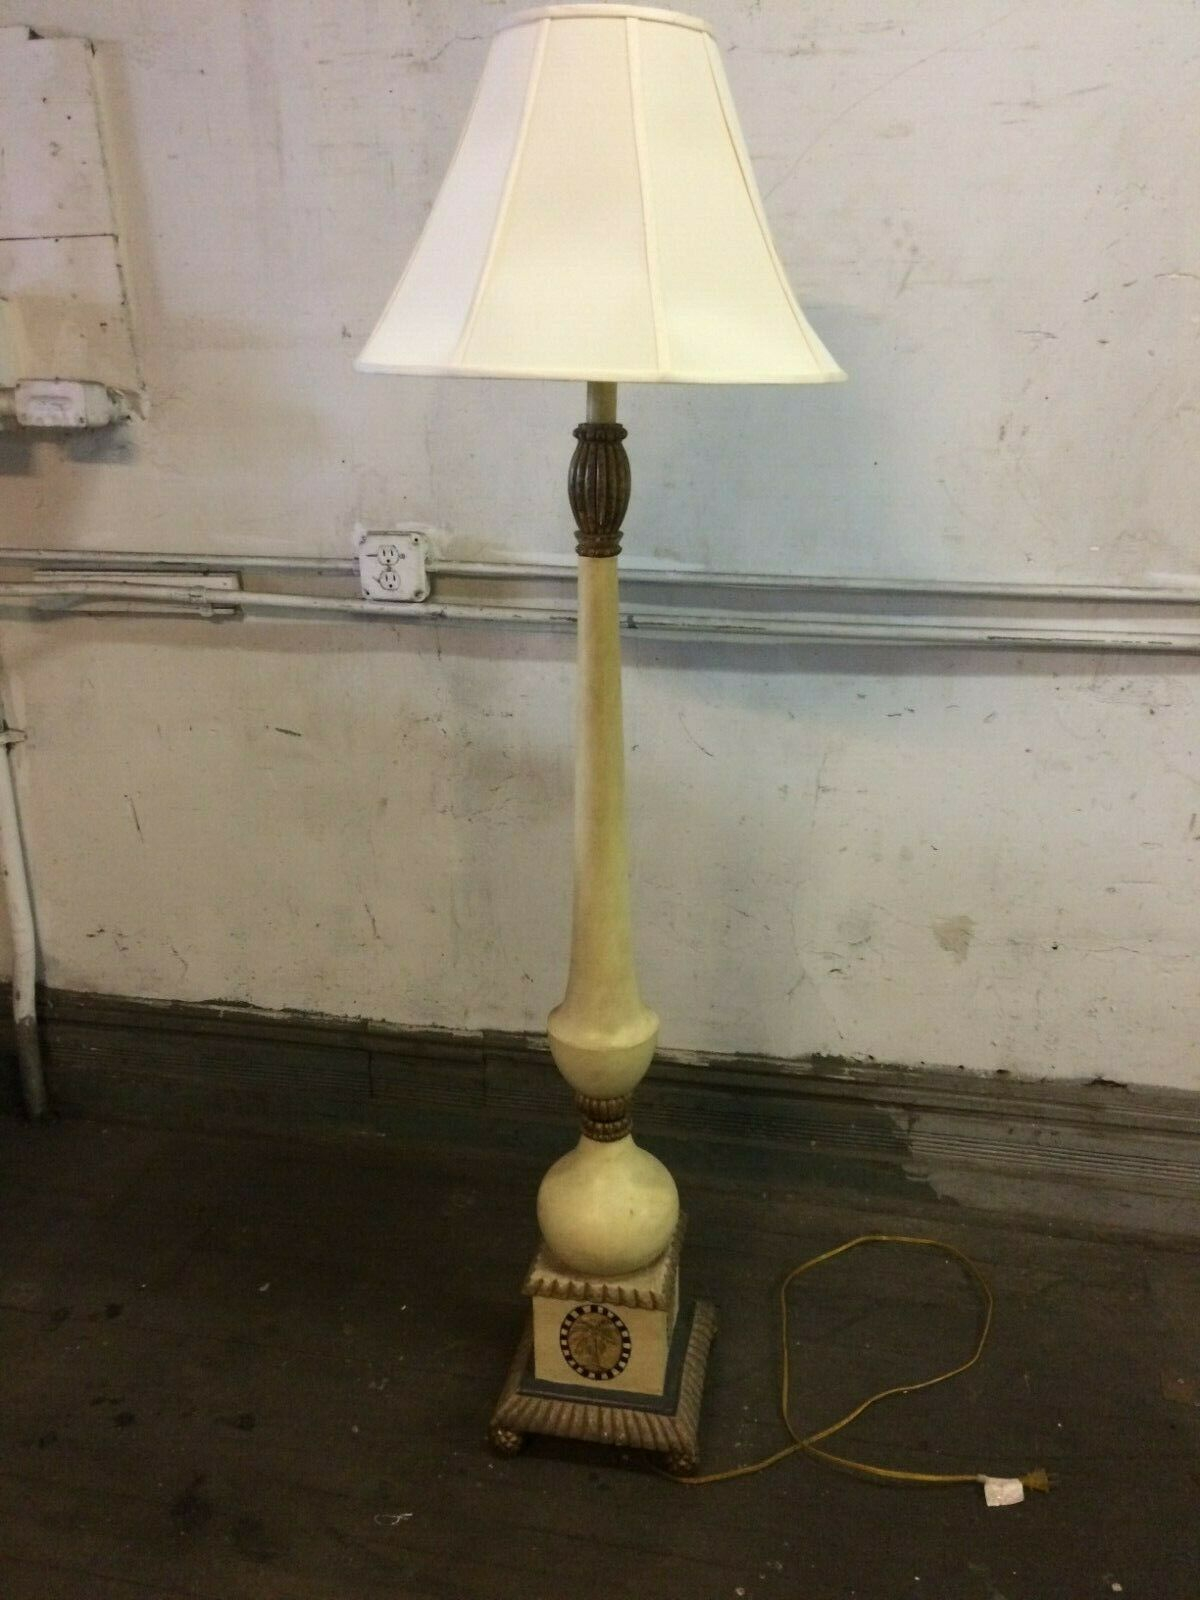 Plantation Country Style Floor Lamp 67 Ht Floor Lamps intended for sizing 1200 X 1600